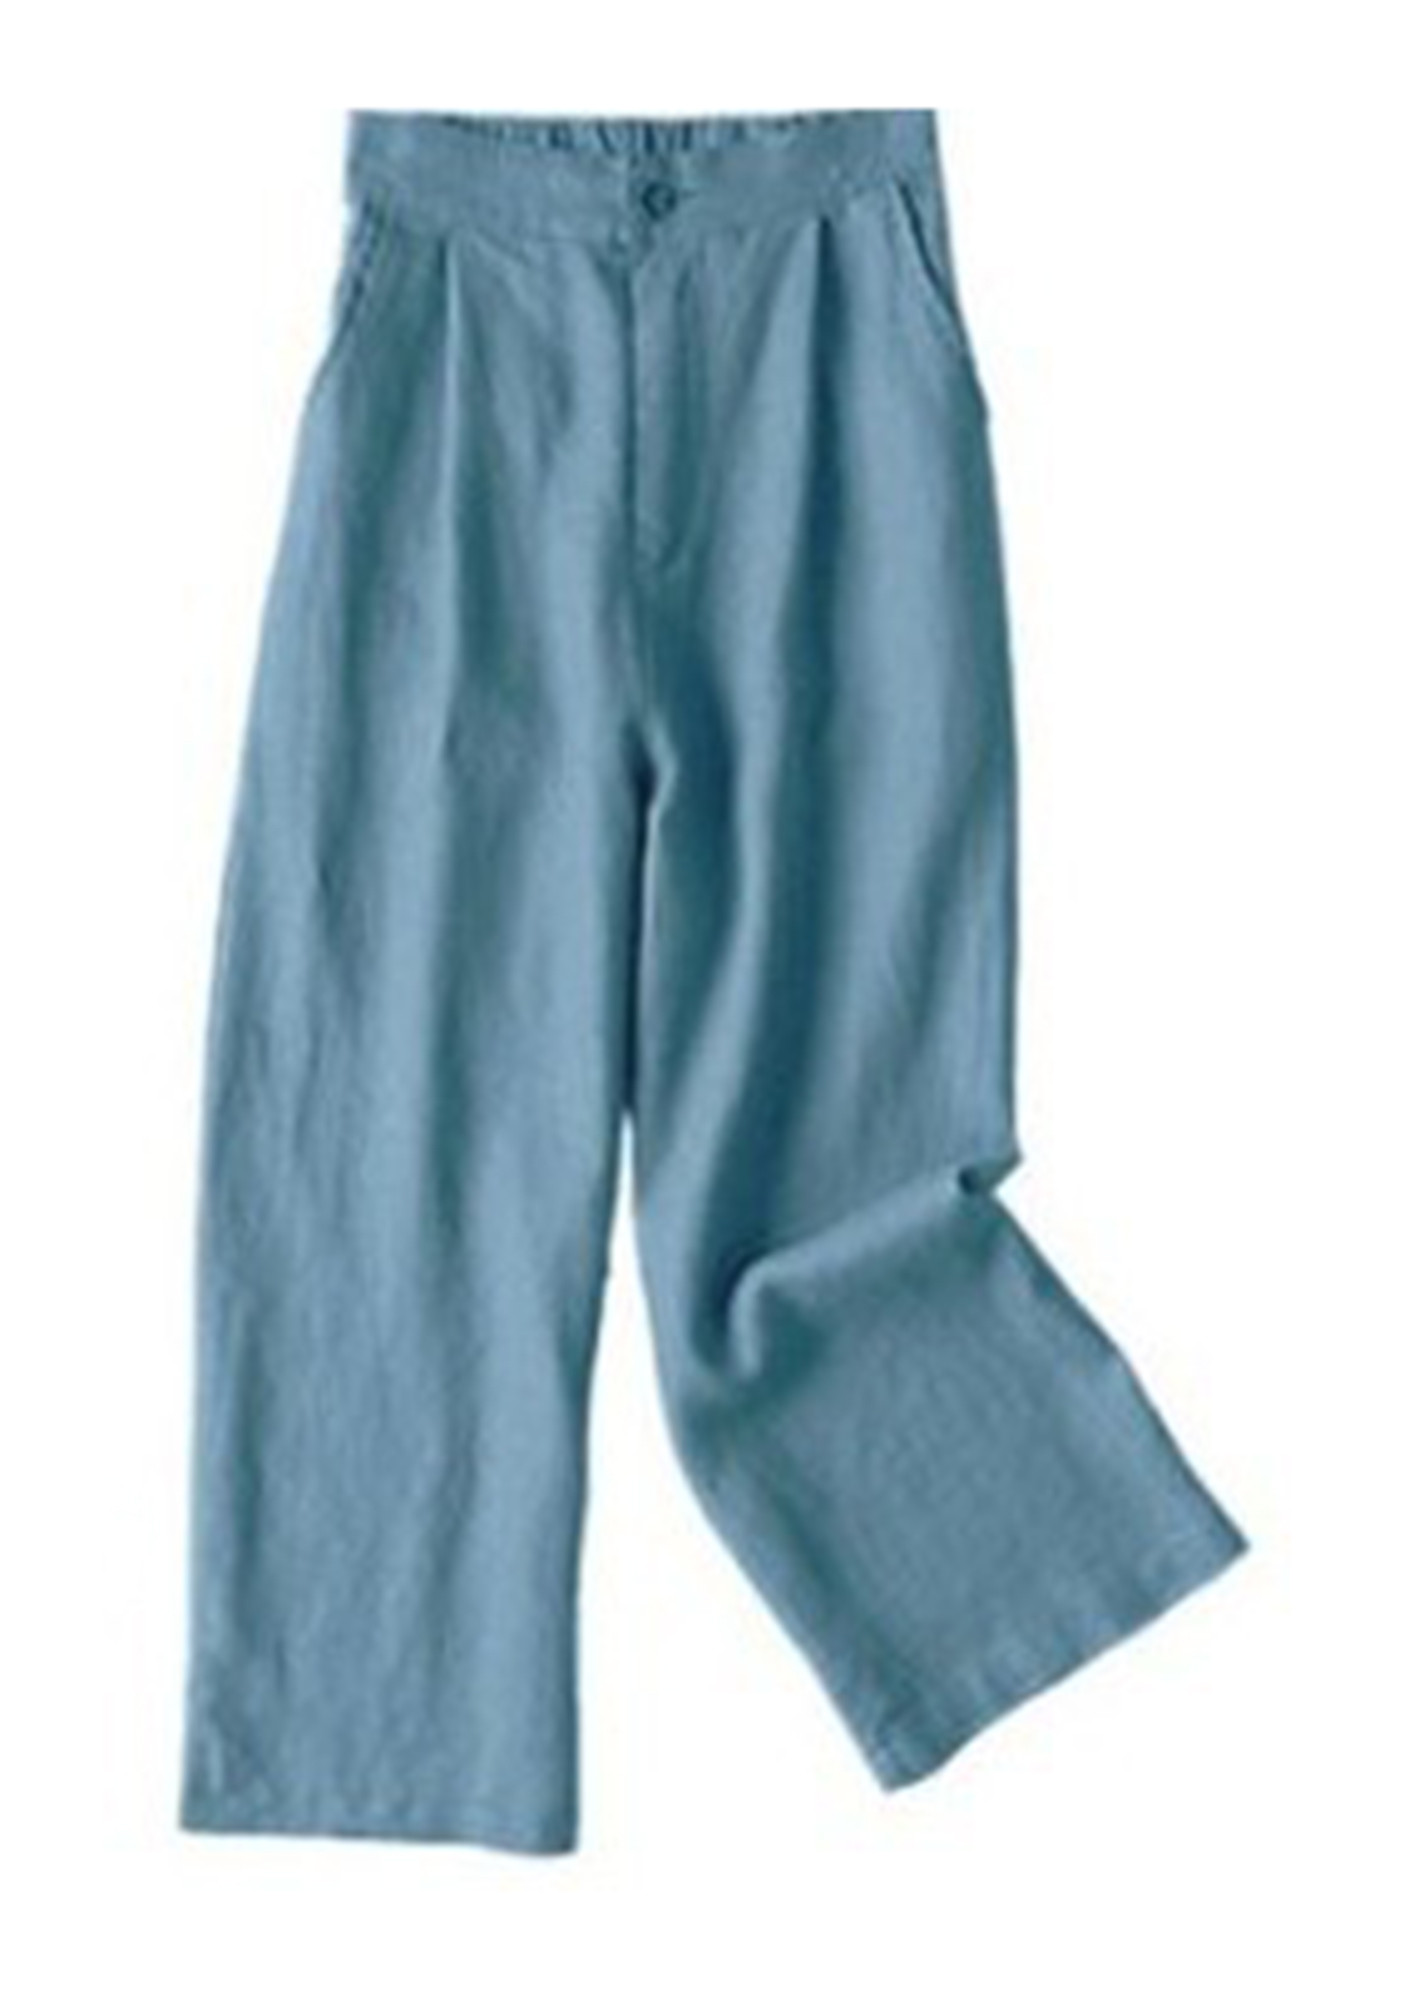 EVERYDAY SKY BLUE LOOSE FIT TROUSERS